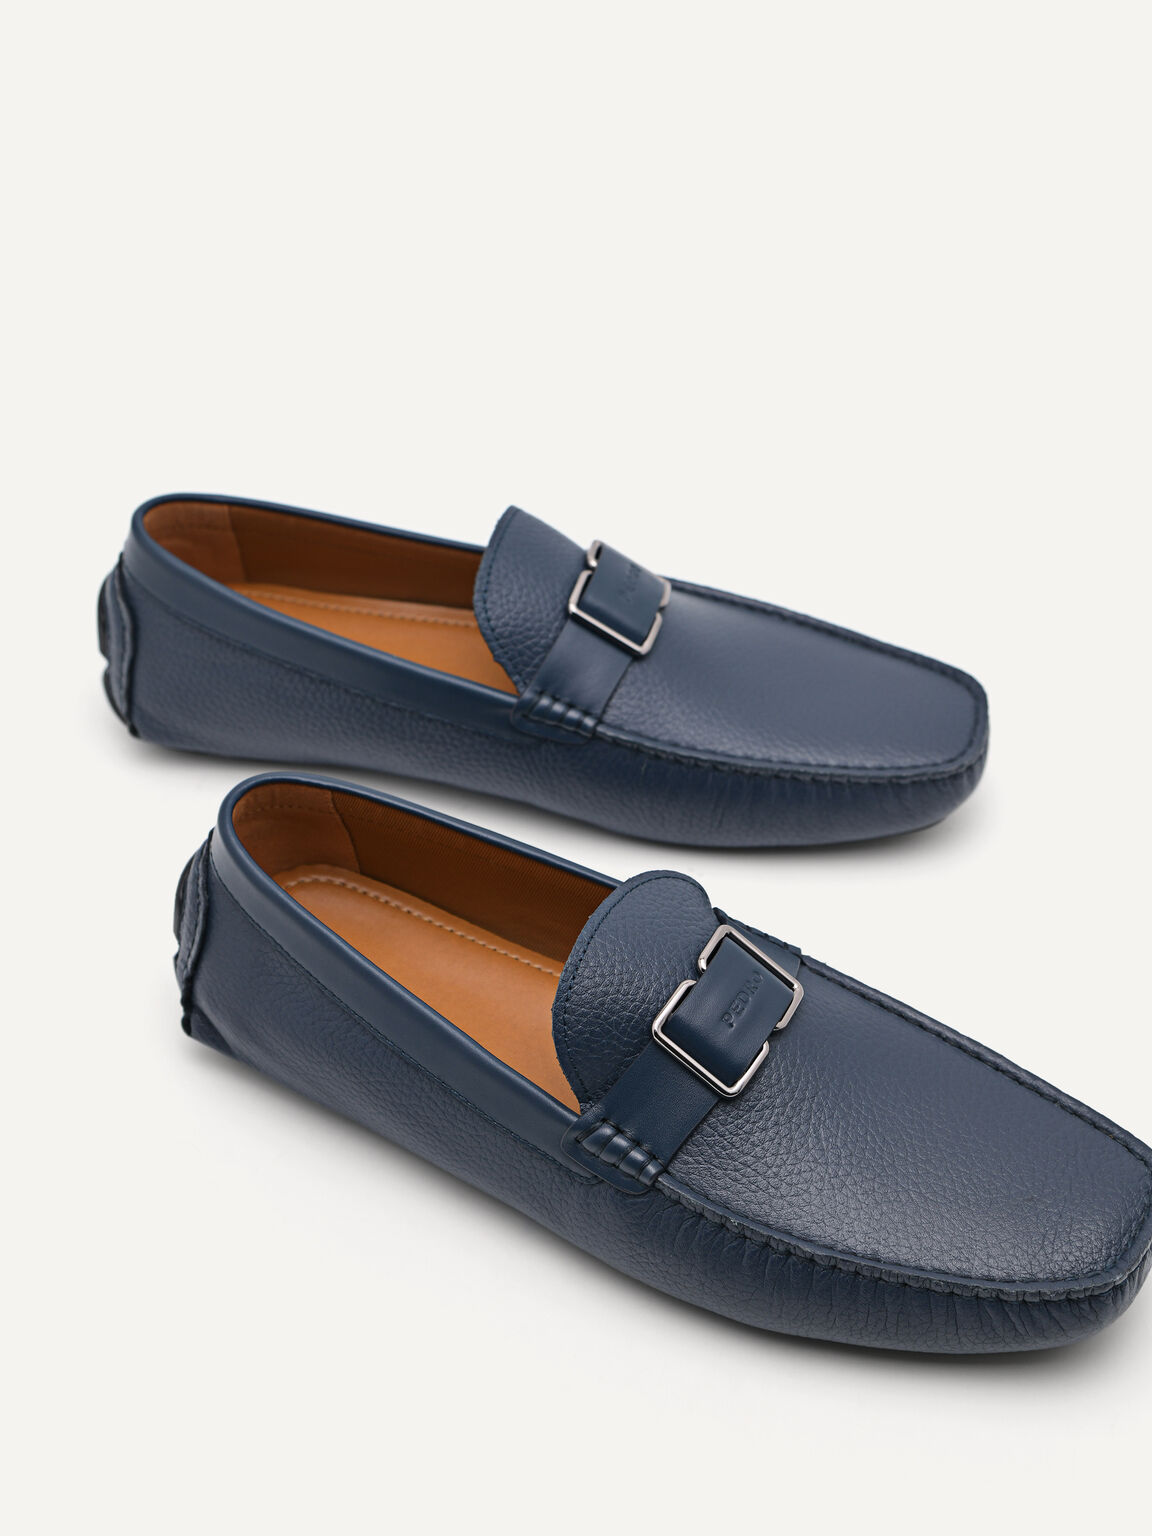 Embossed Leather Moccasins, Navy